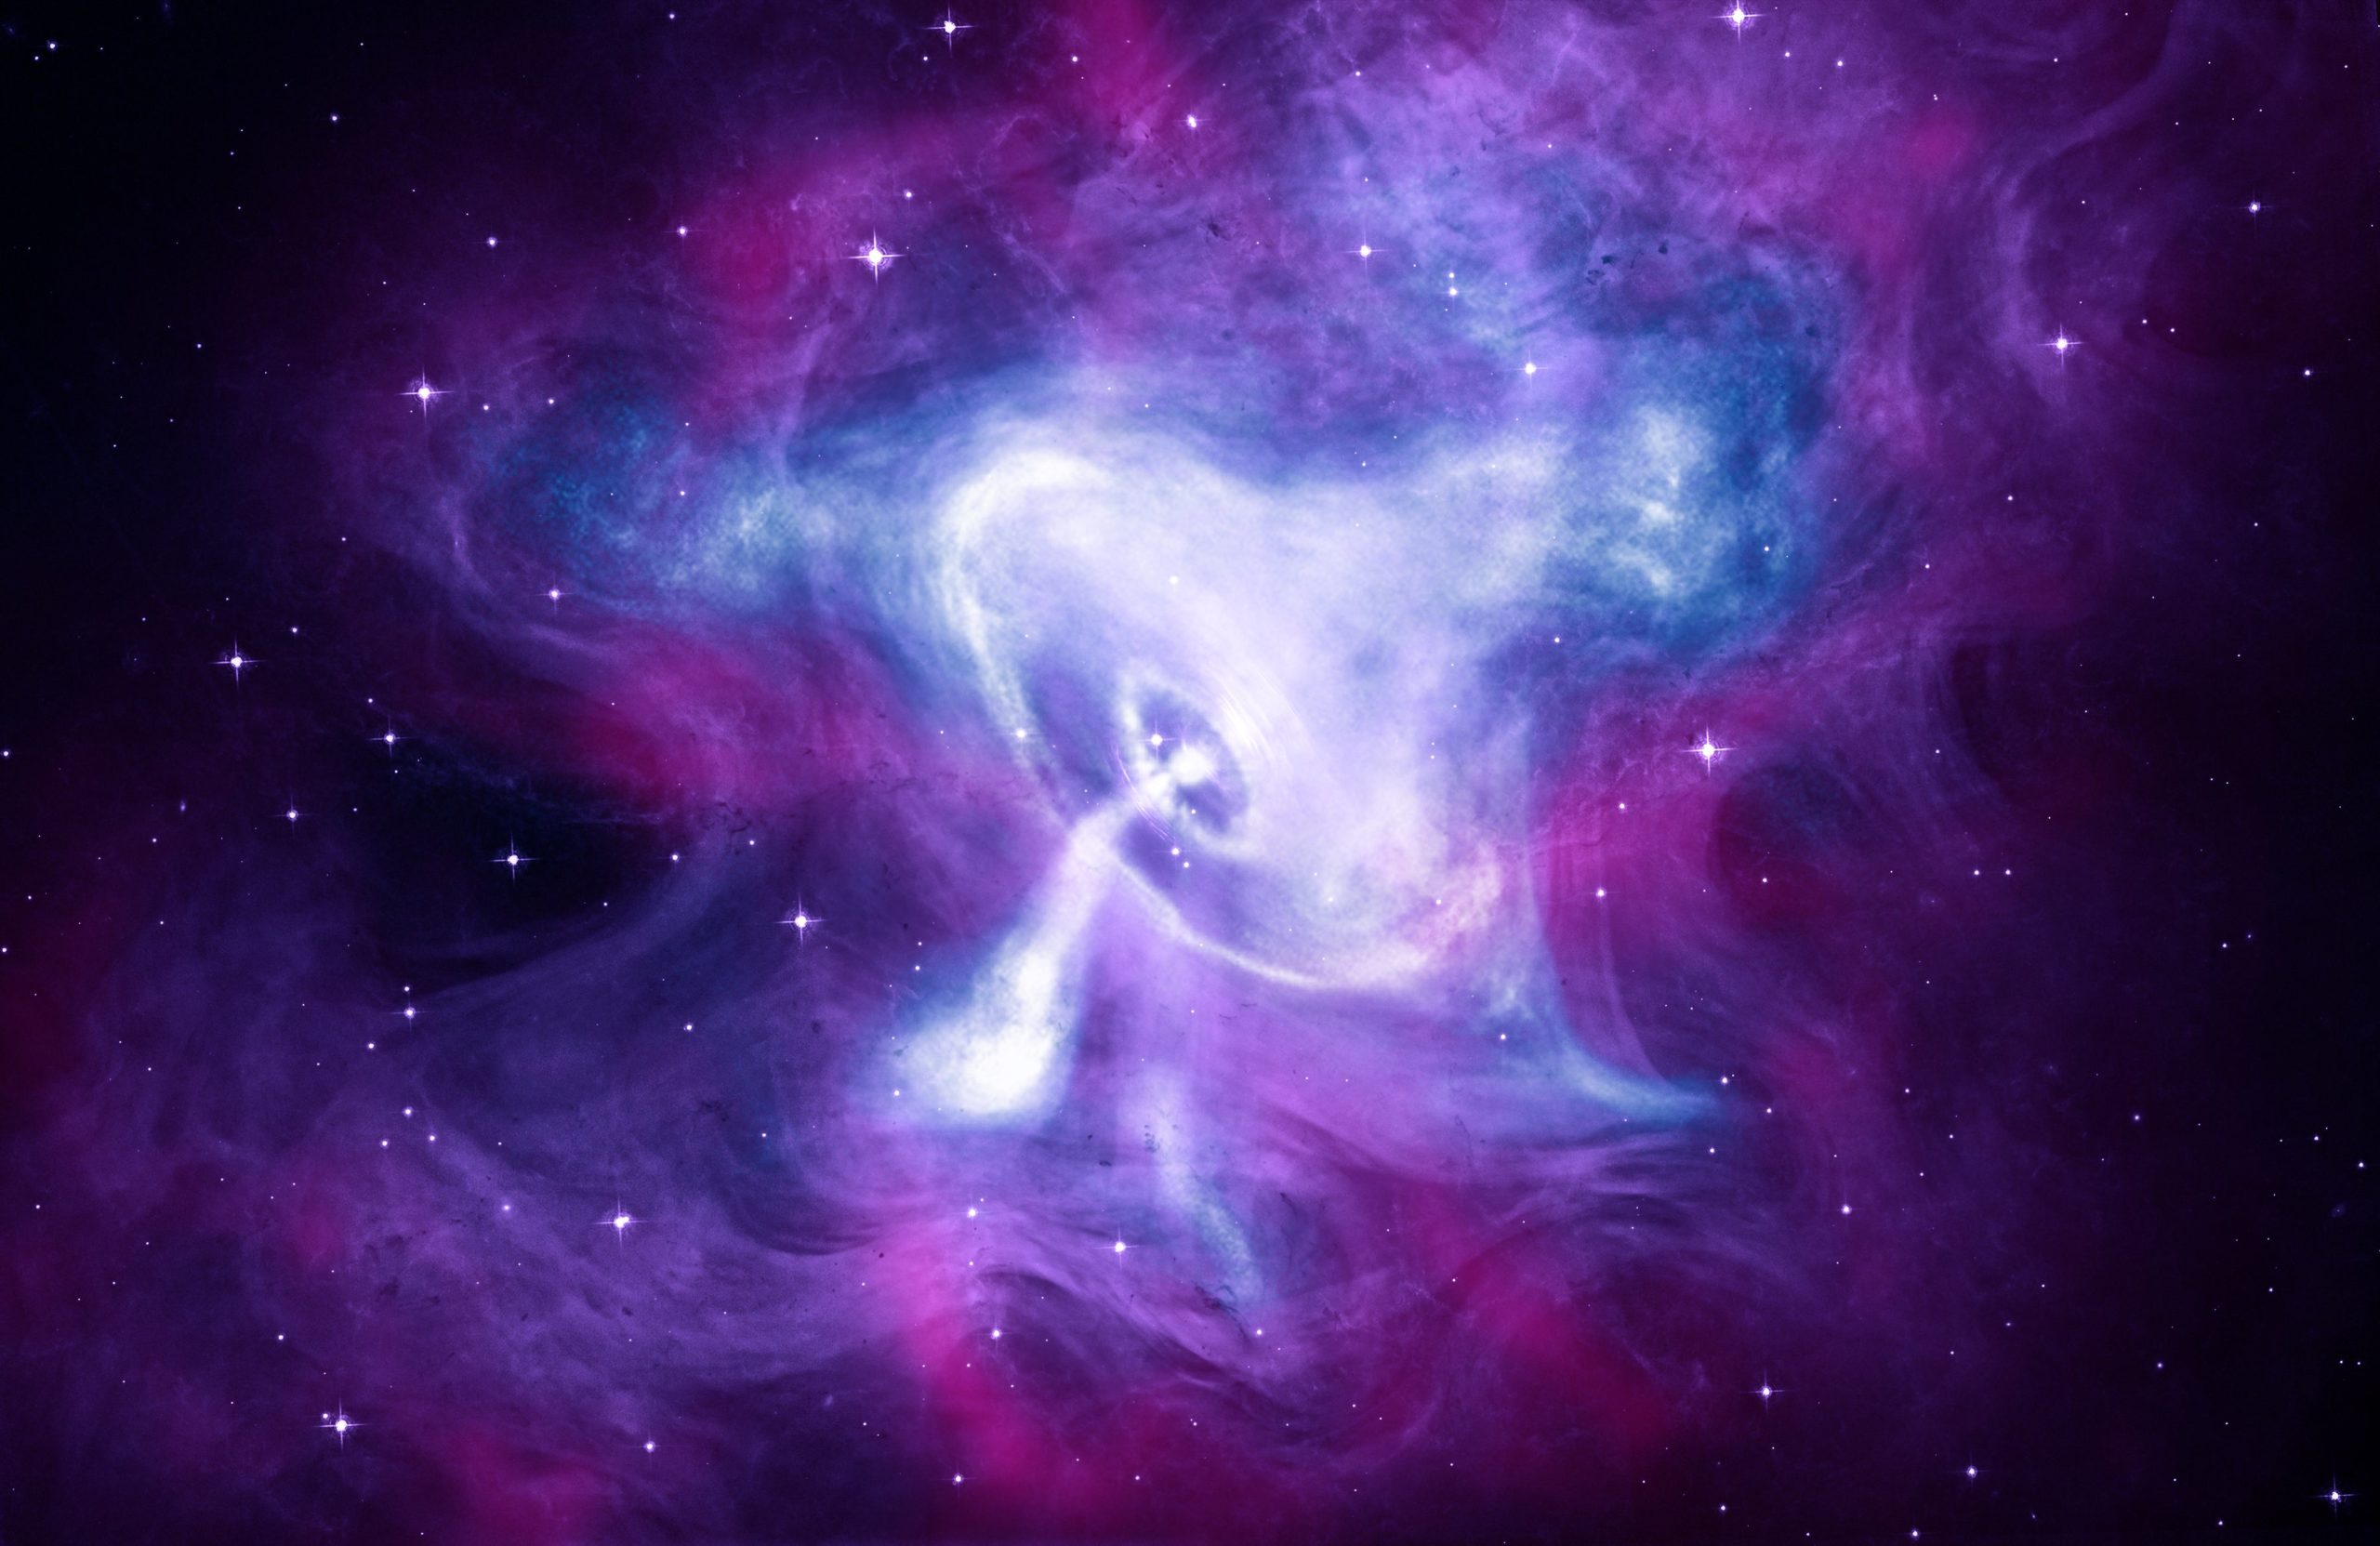 A 2018 composite image of the Crab Nebula, made with data from the Chandra X-ray Observatory, the Hubble Space Telescope, and the Spitzer Space Telescope. (Image: X-ray: NASA/CXC/SAO; Optical: NASA/STScI; Infrared: NASA-JPL-Caltech)